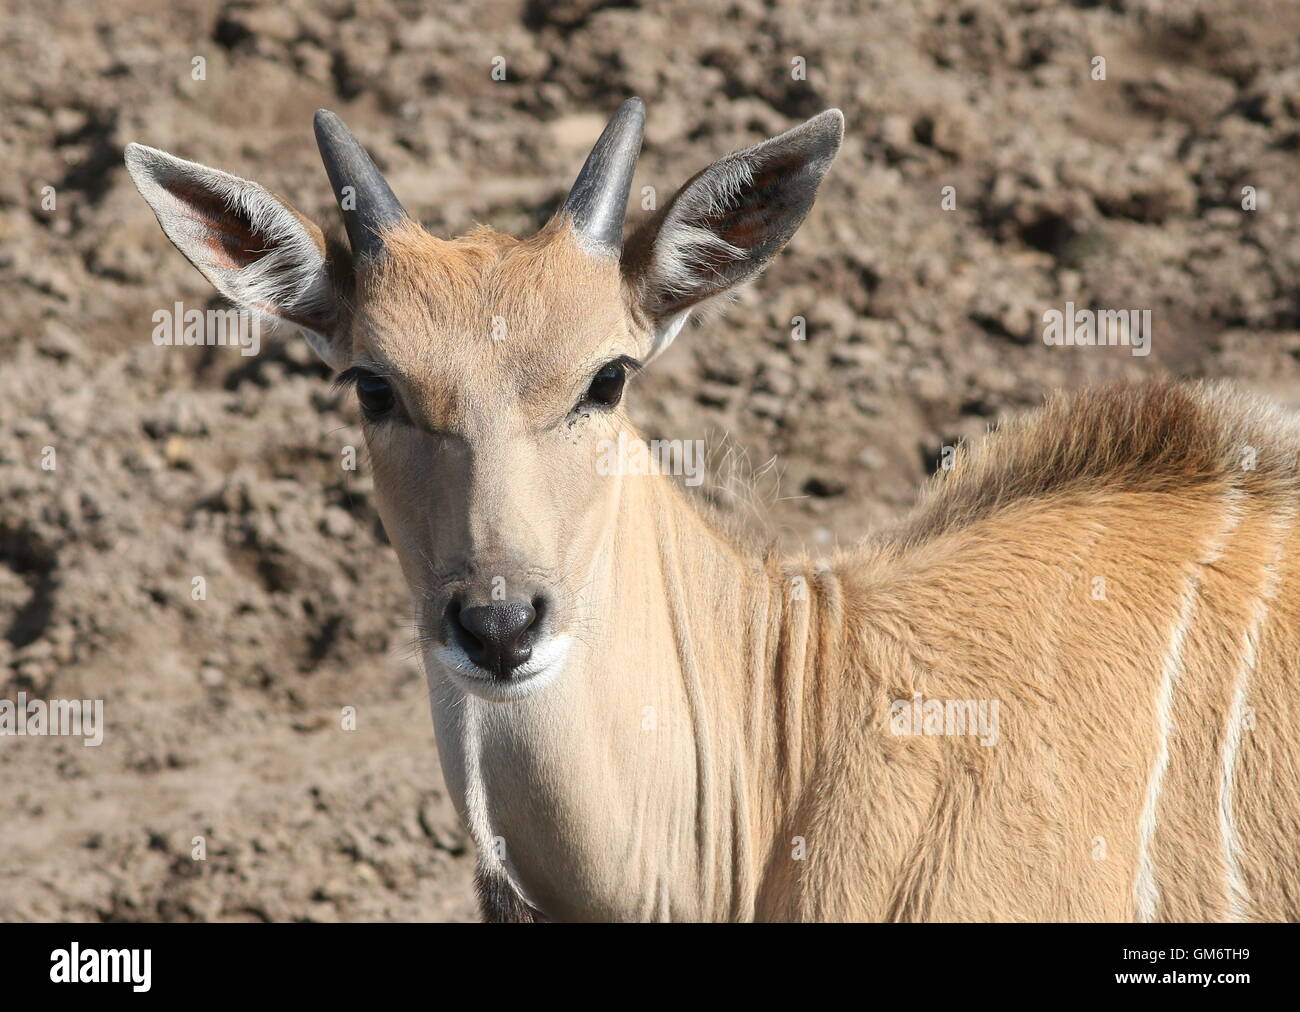 Juvenile African Southern or Common Eland antelope (Taurotragus oryx) Stock Photo